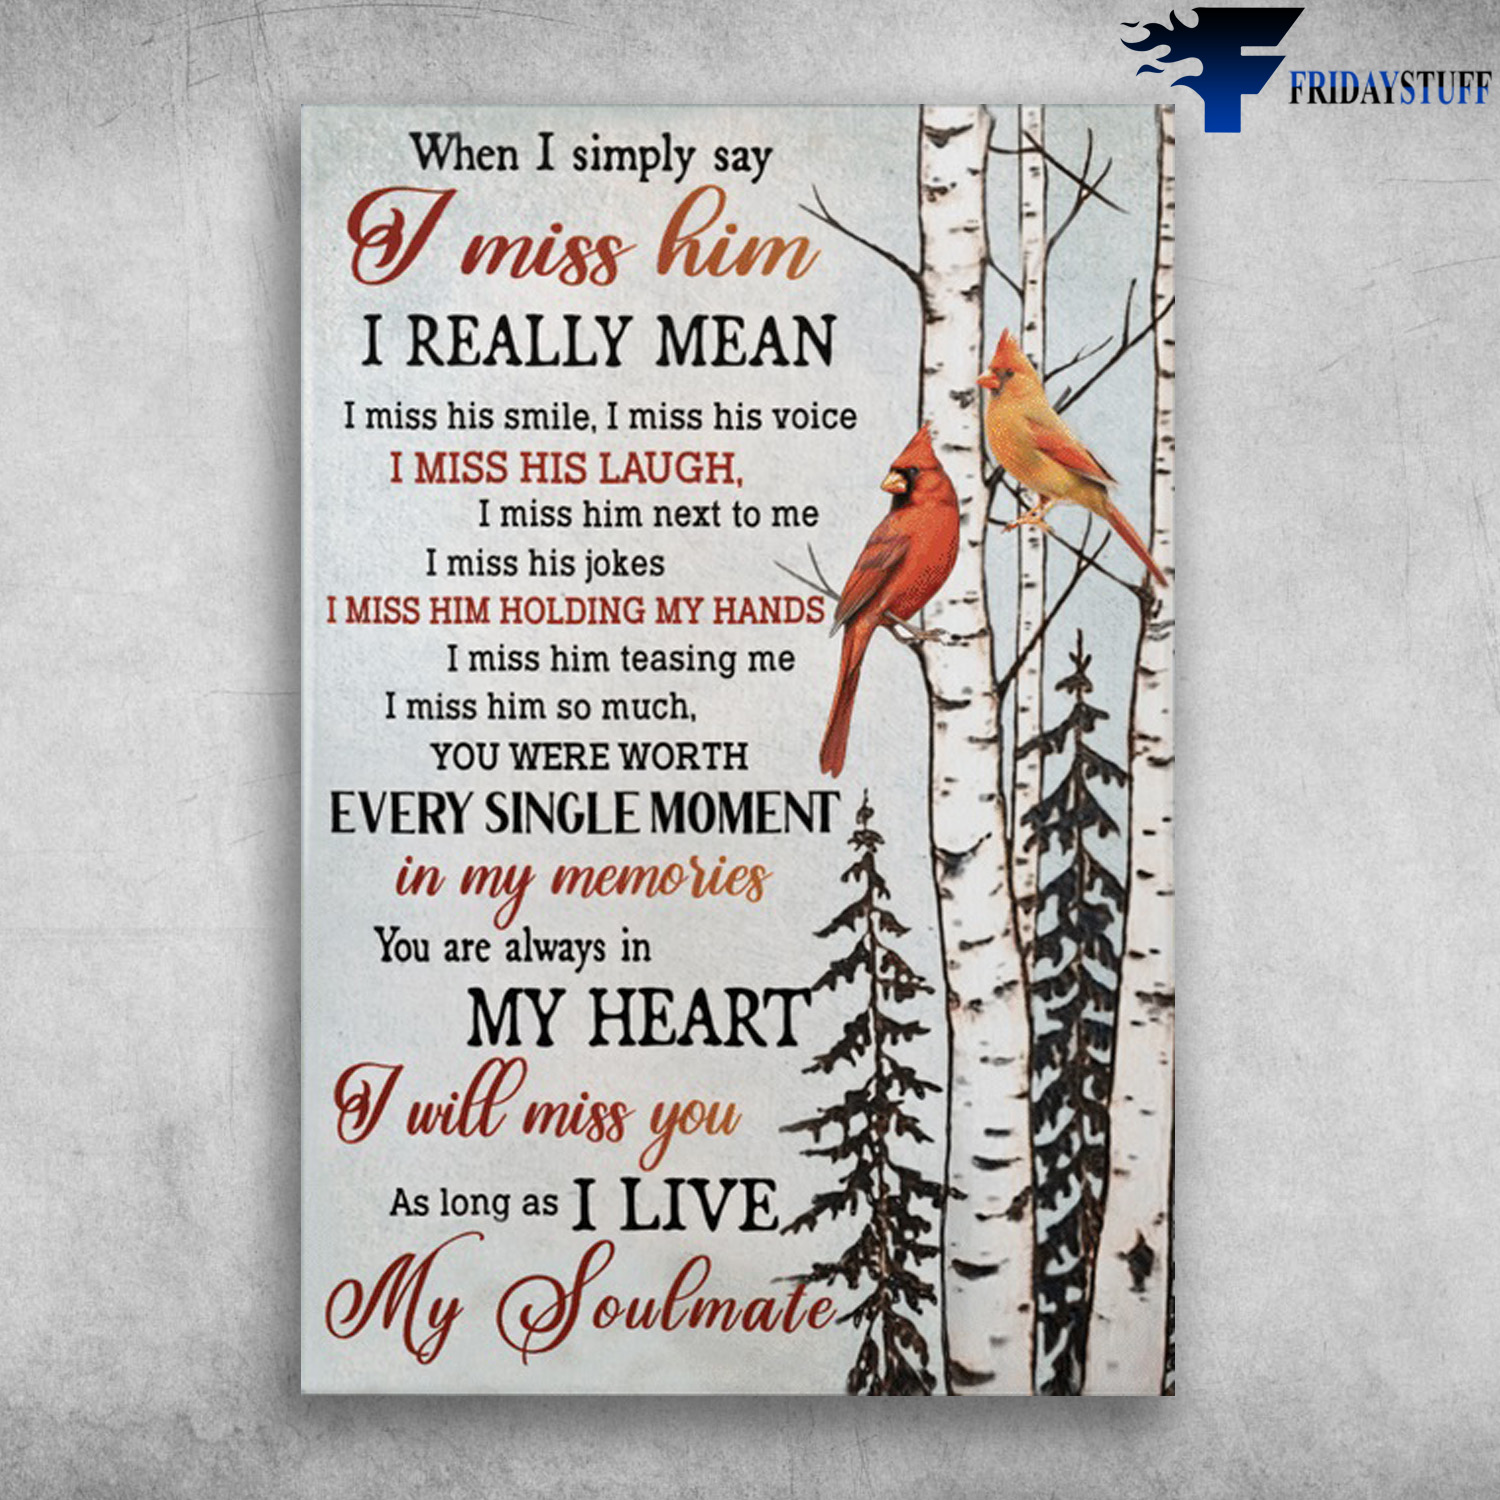 Cardinal Bird - When I Simply Say, I Miss Him, I Really Mean, I Miss His Smile, I Miss His Voice, I Miss His Laugh, I Miss Him Next To Me, I Miss His Jokes, I Miss Him Holding My Hands, I Miss Him Teasing Me, I Miss Him So Much